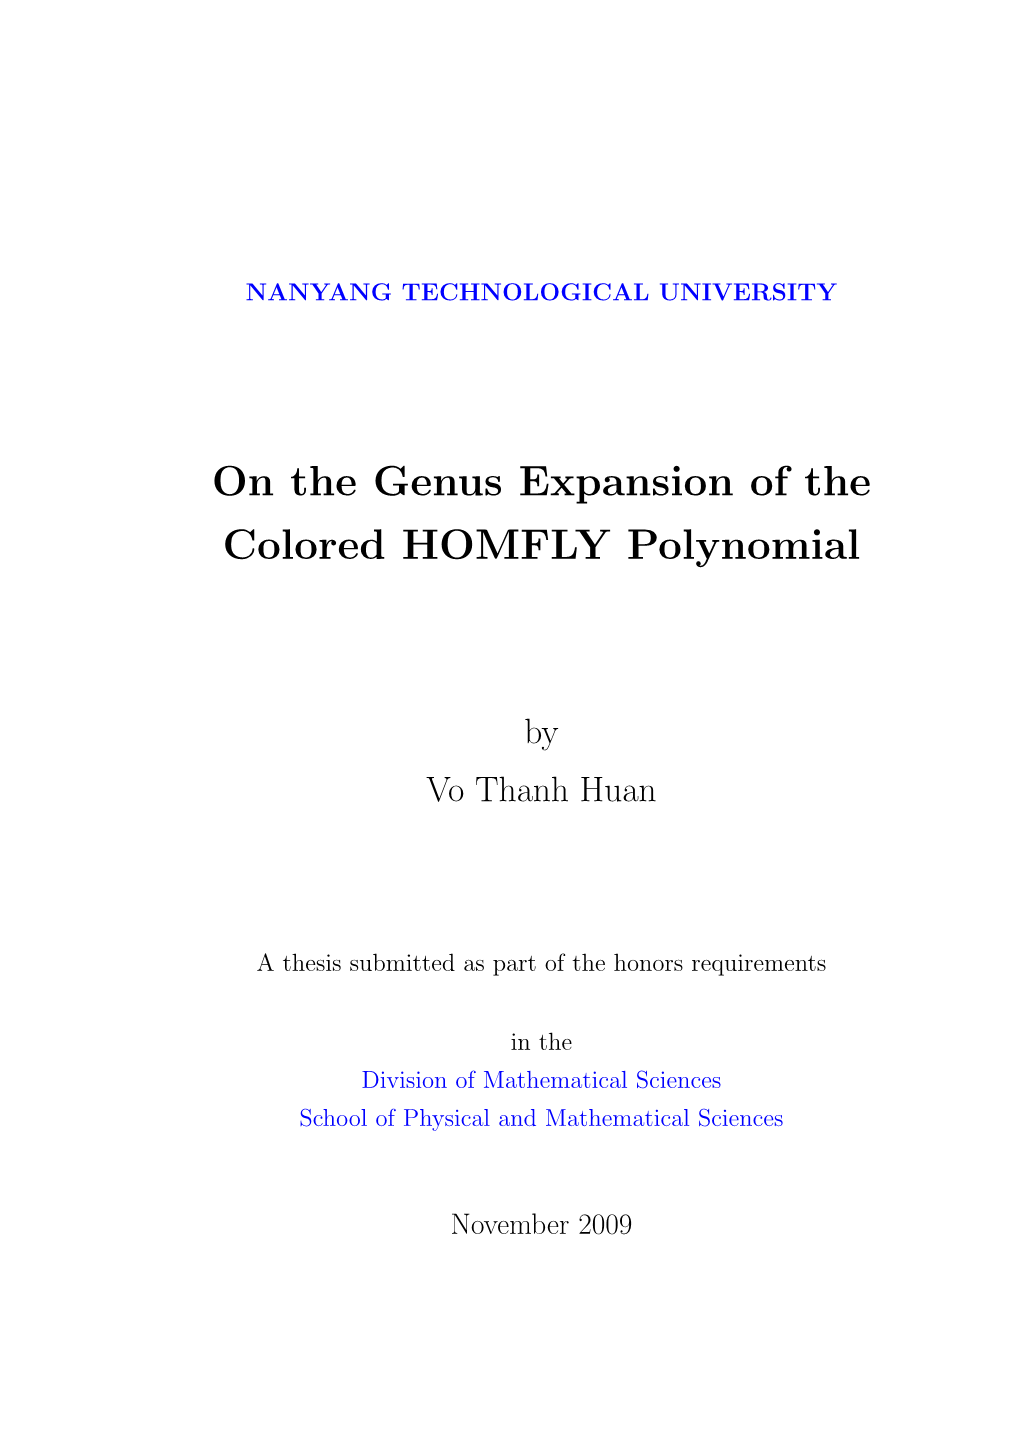 On the Genus Expansion of the Colored HOMFLY Polynomial